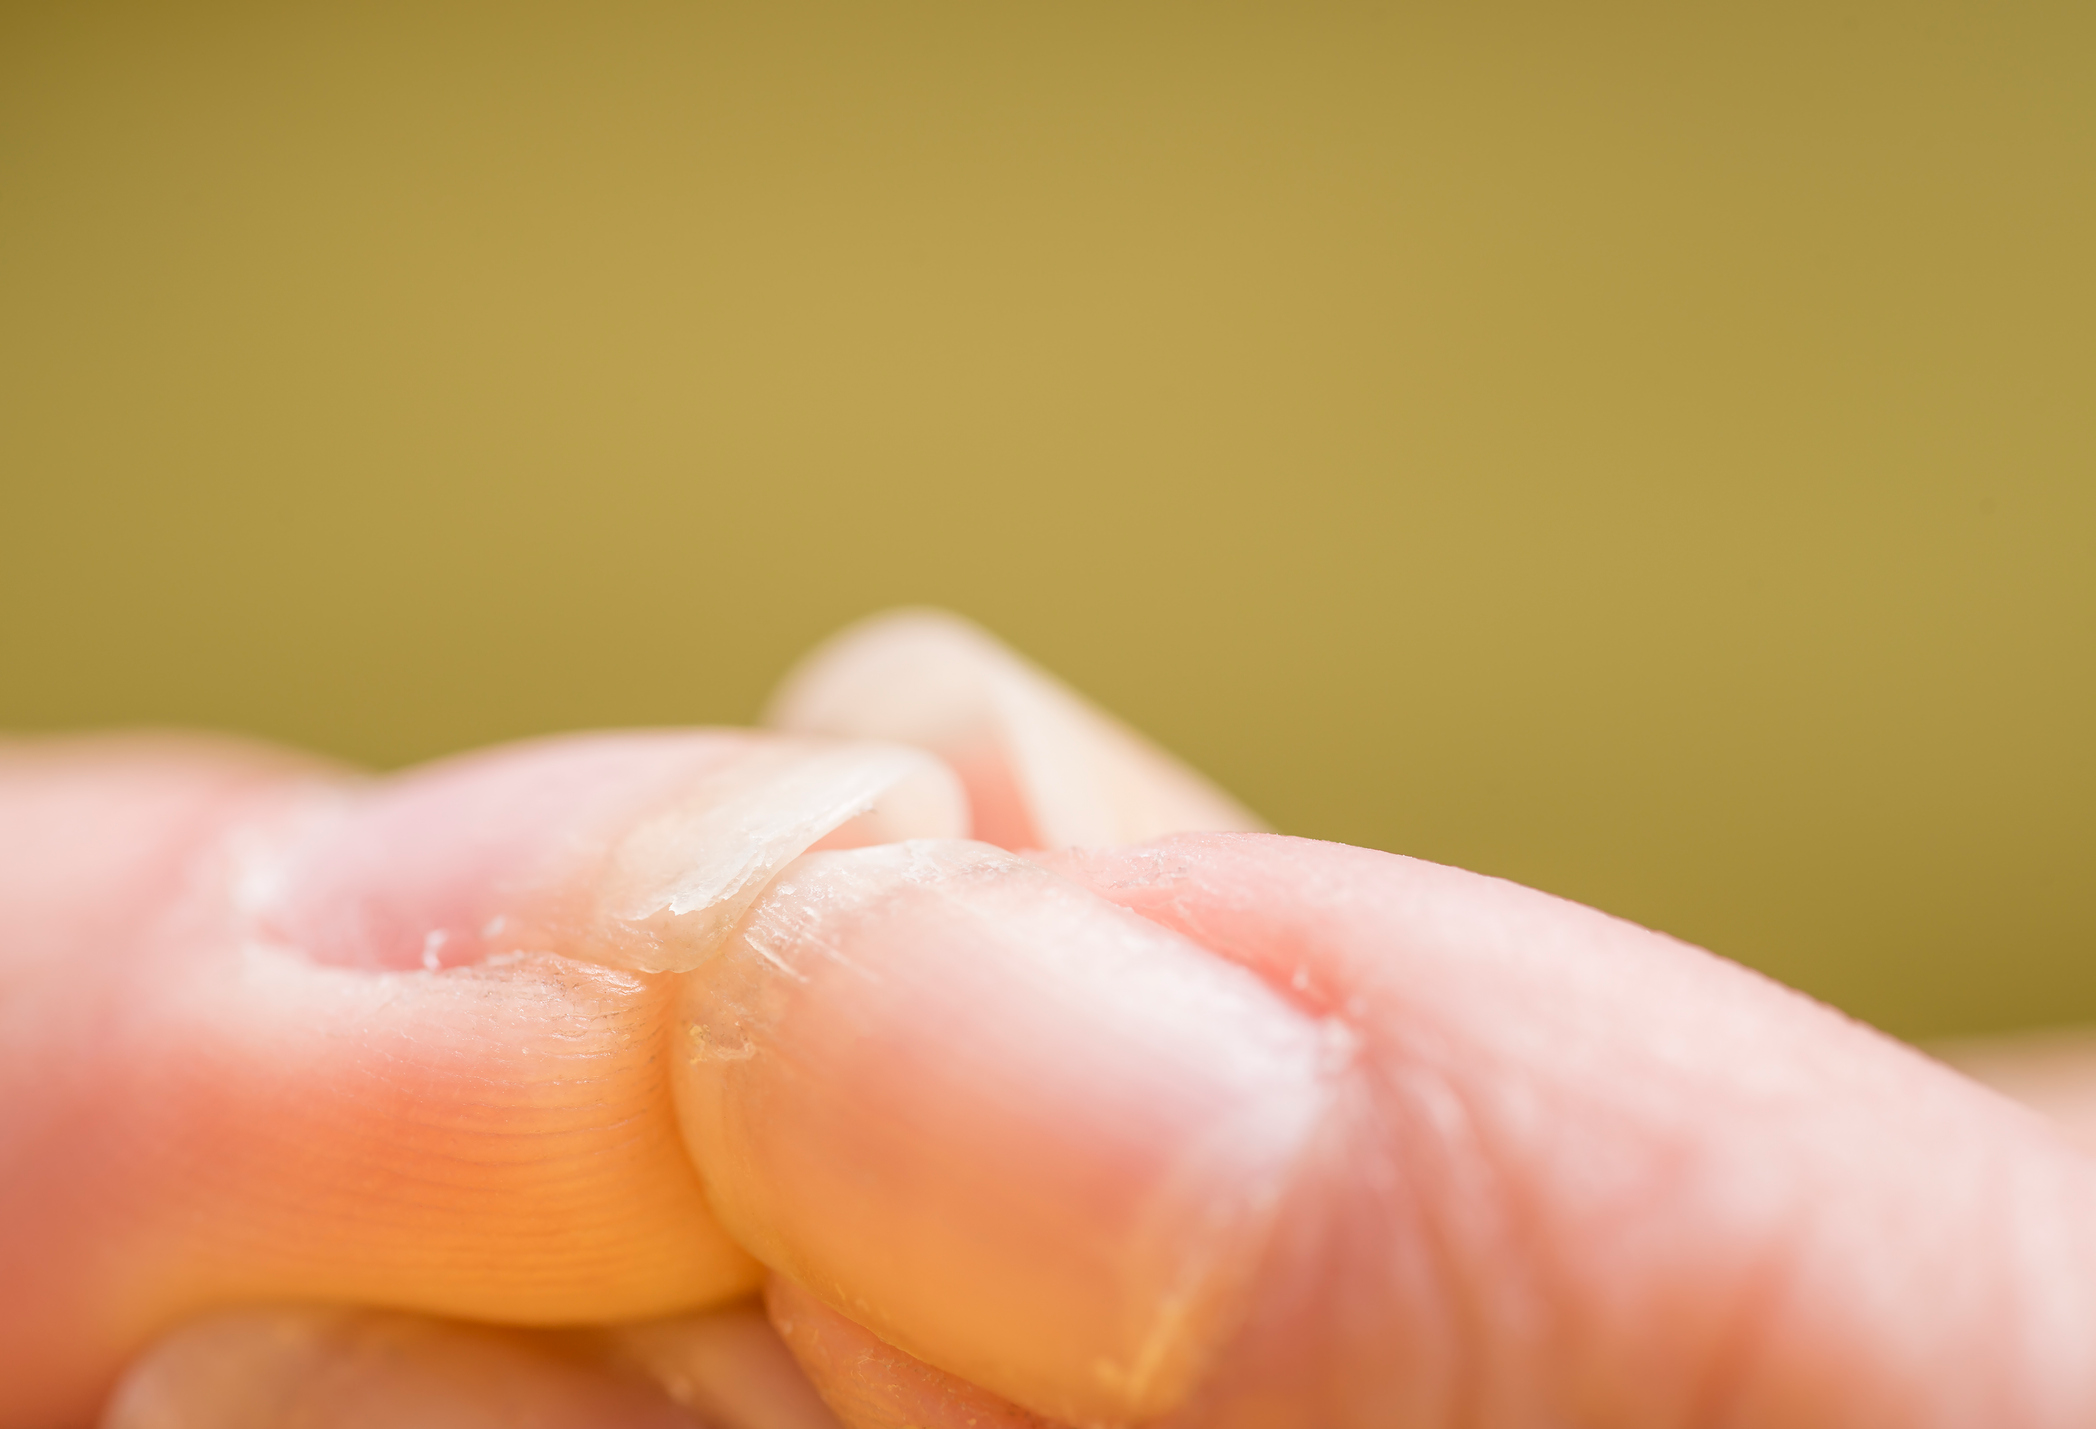 Brittle Nails and Hair Loss in Hypothyroidism | NEJM